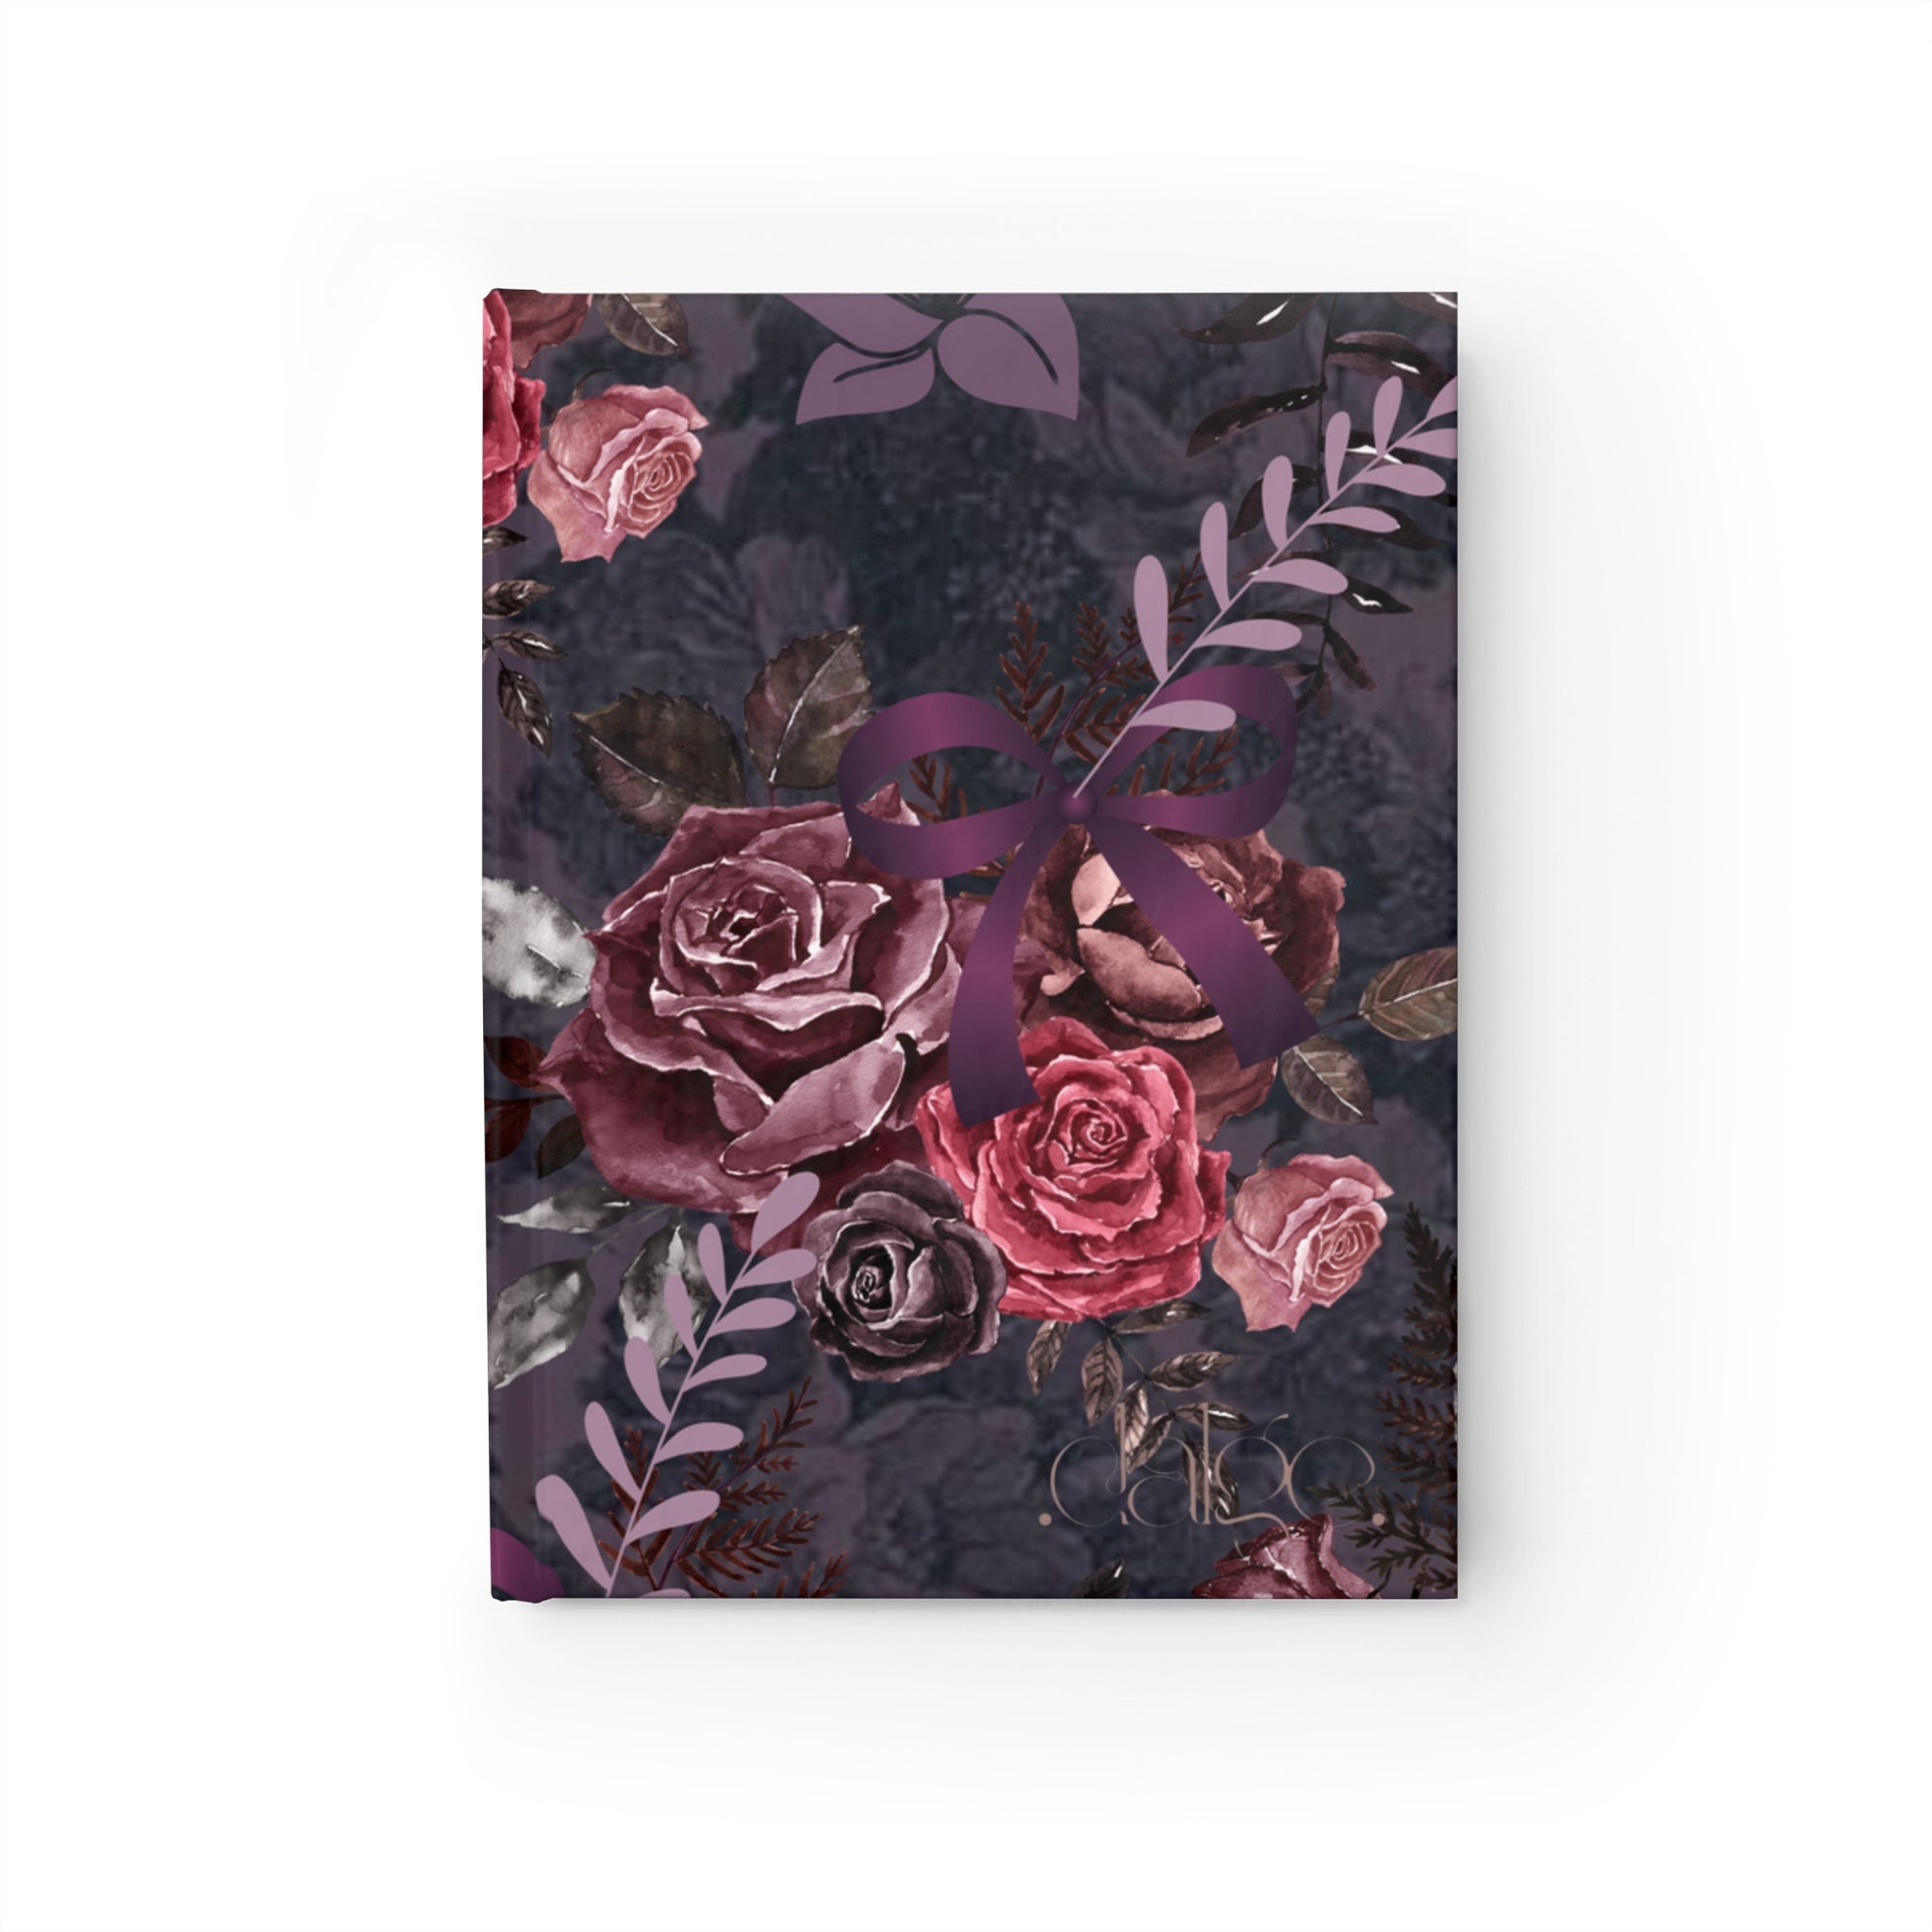 Dark Floral Hard Cover Journal Notebook, Dark Journals. Blank Journal.personalized gifts, Writers journal, writing, Designed cute journals personalized gifts-gifts for teachers-Paper products-Dalge